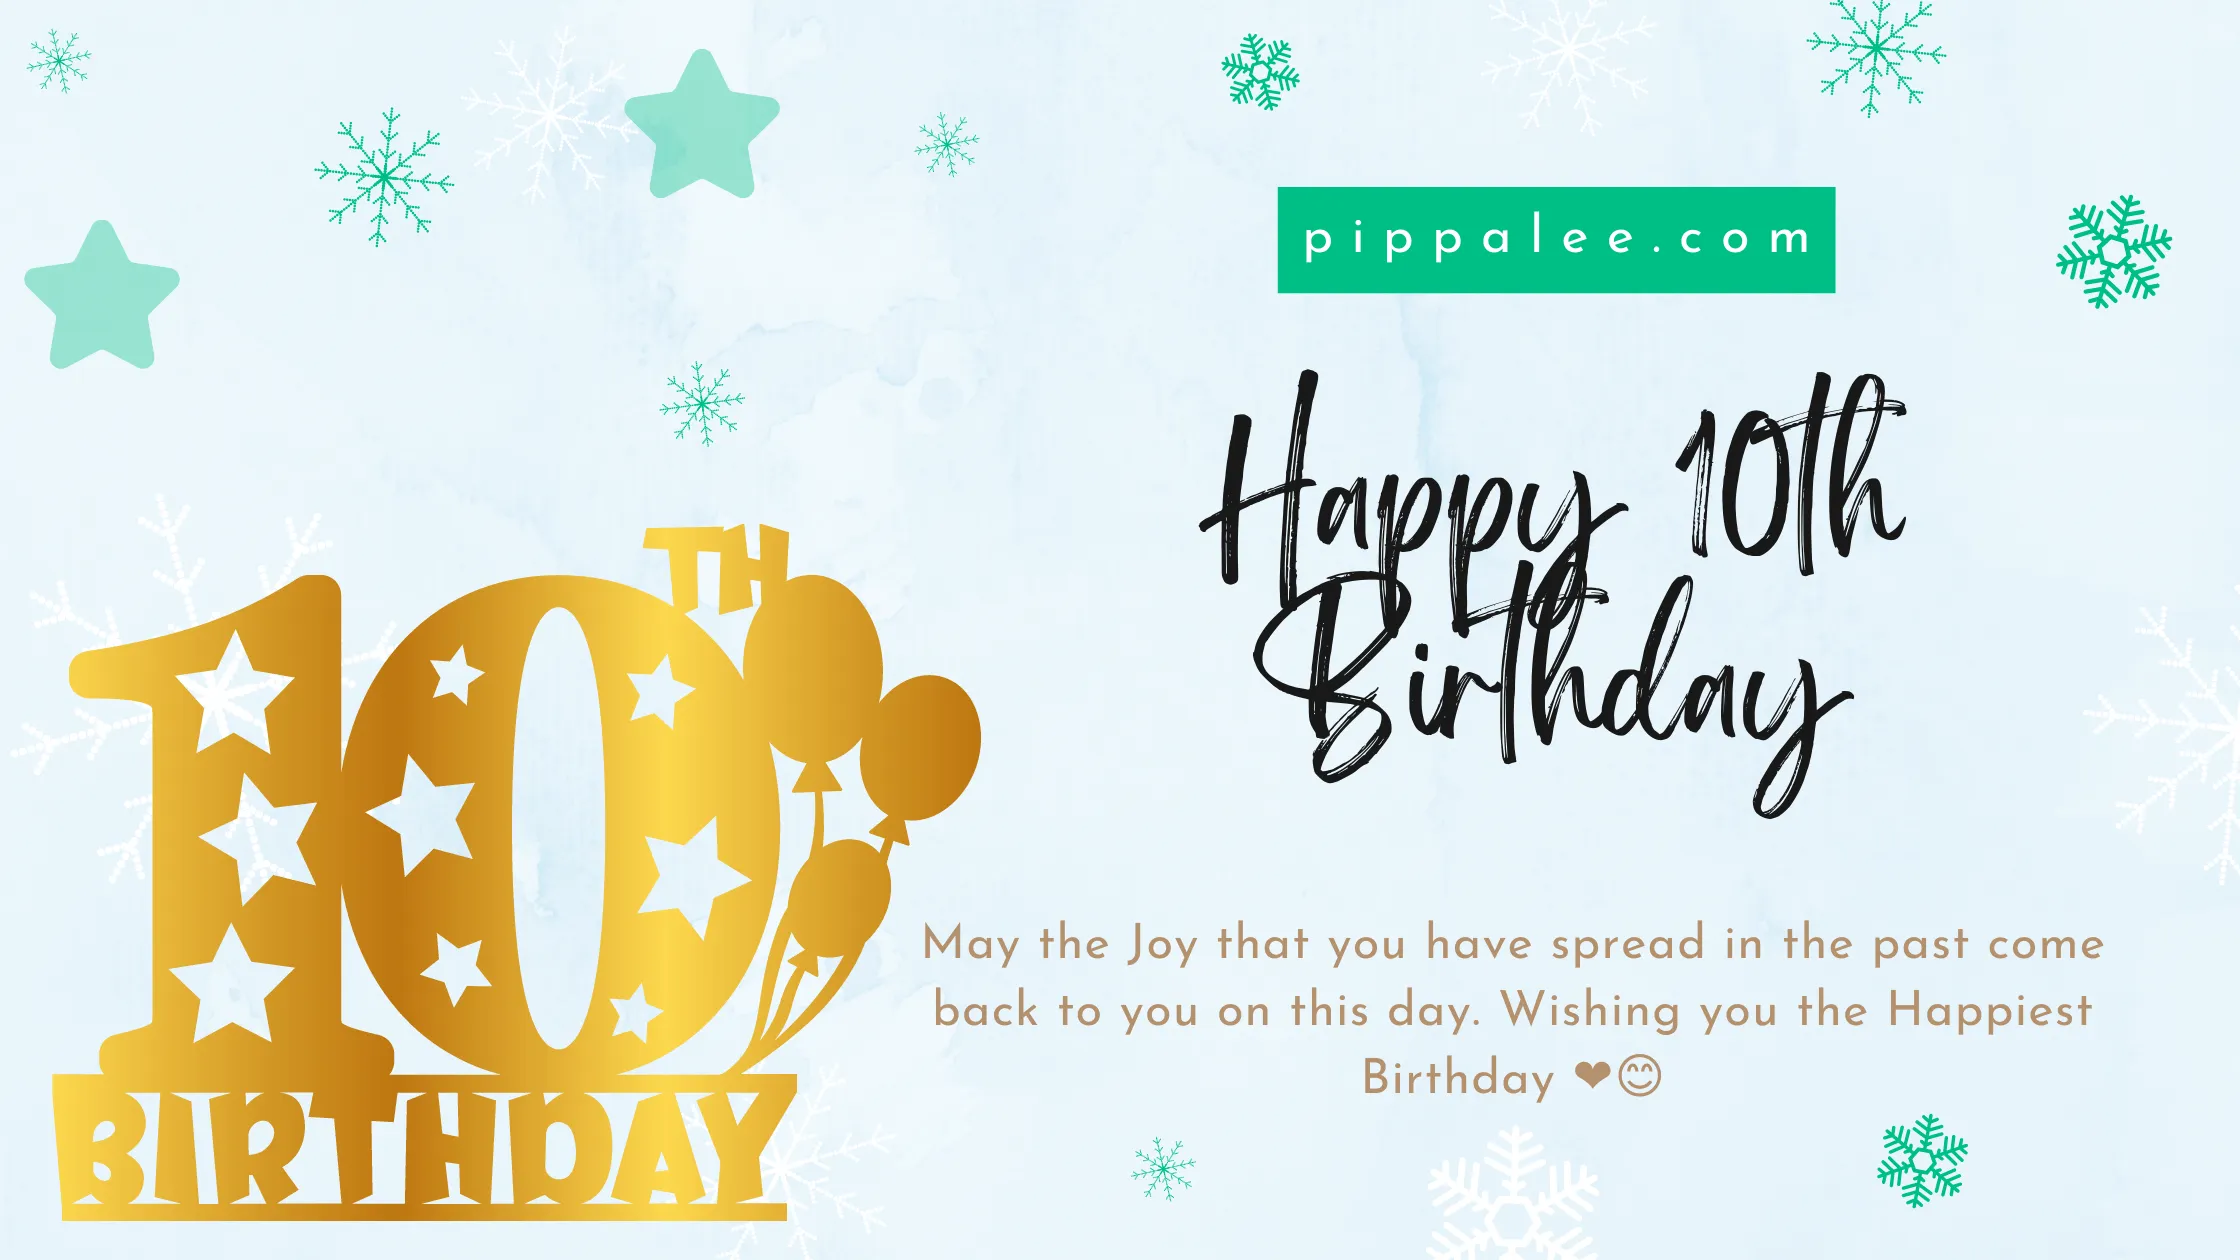 Happy 10th Birthday - Wishes & Messages